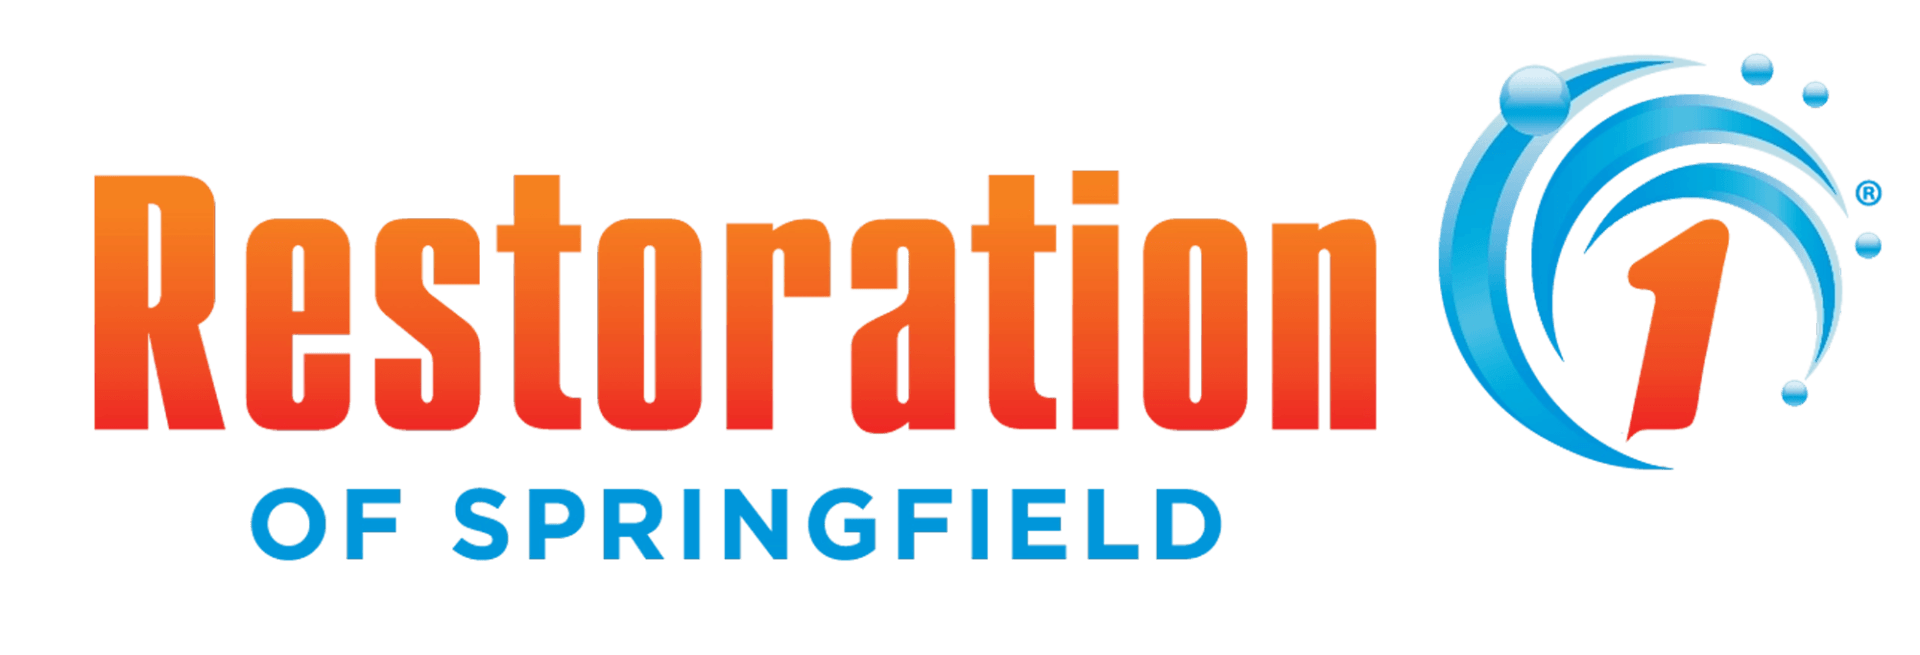 Restoration of Springfield company logo - click to go to home page